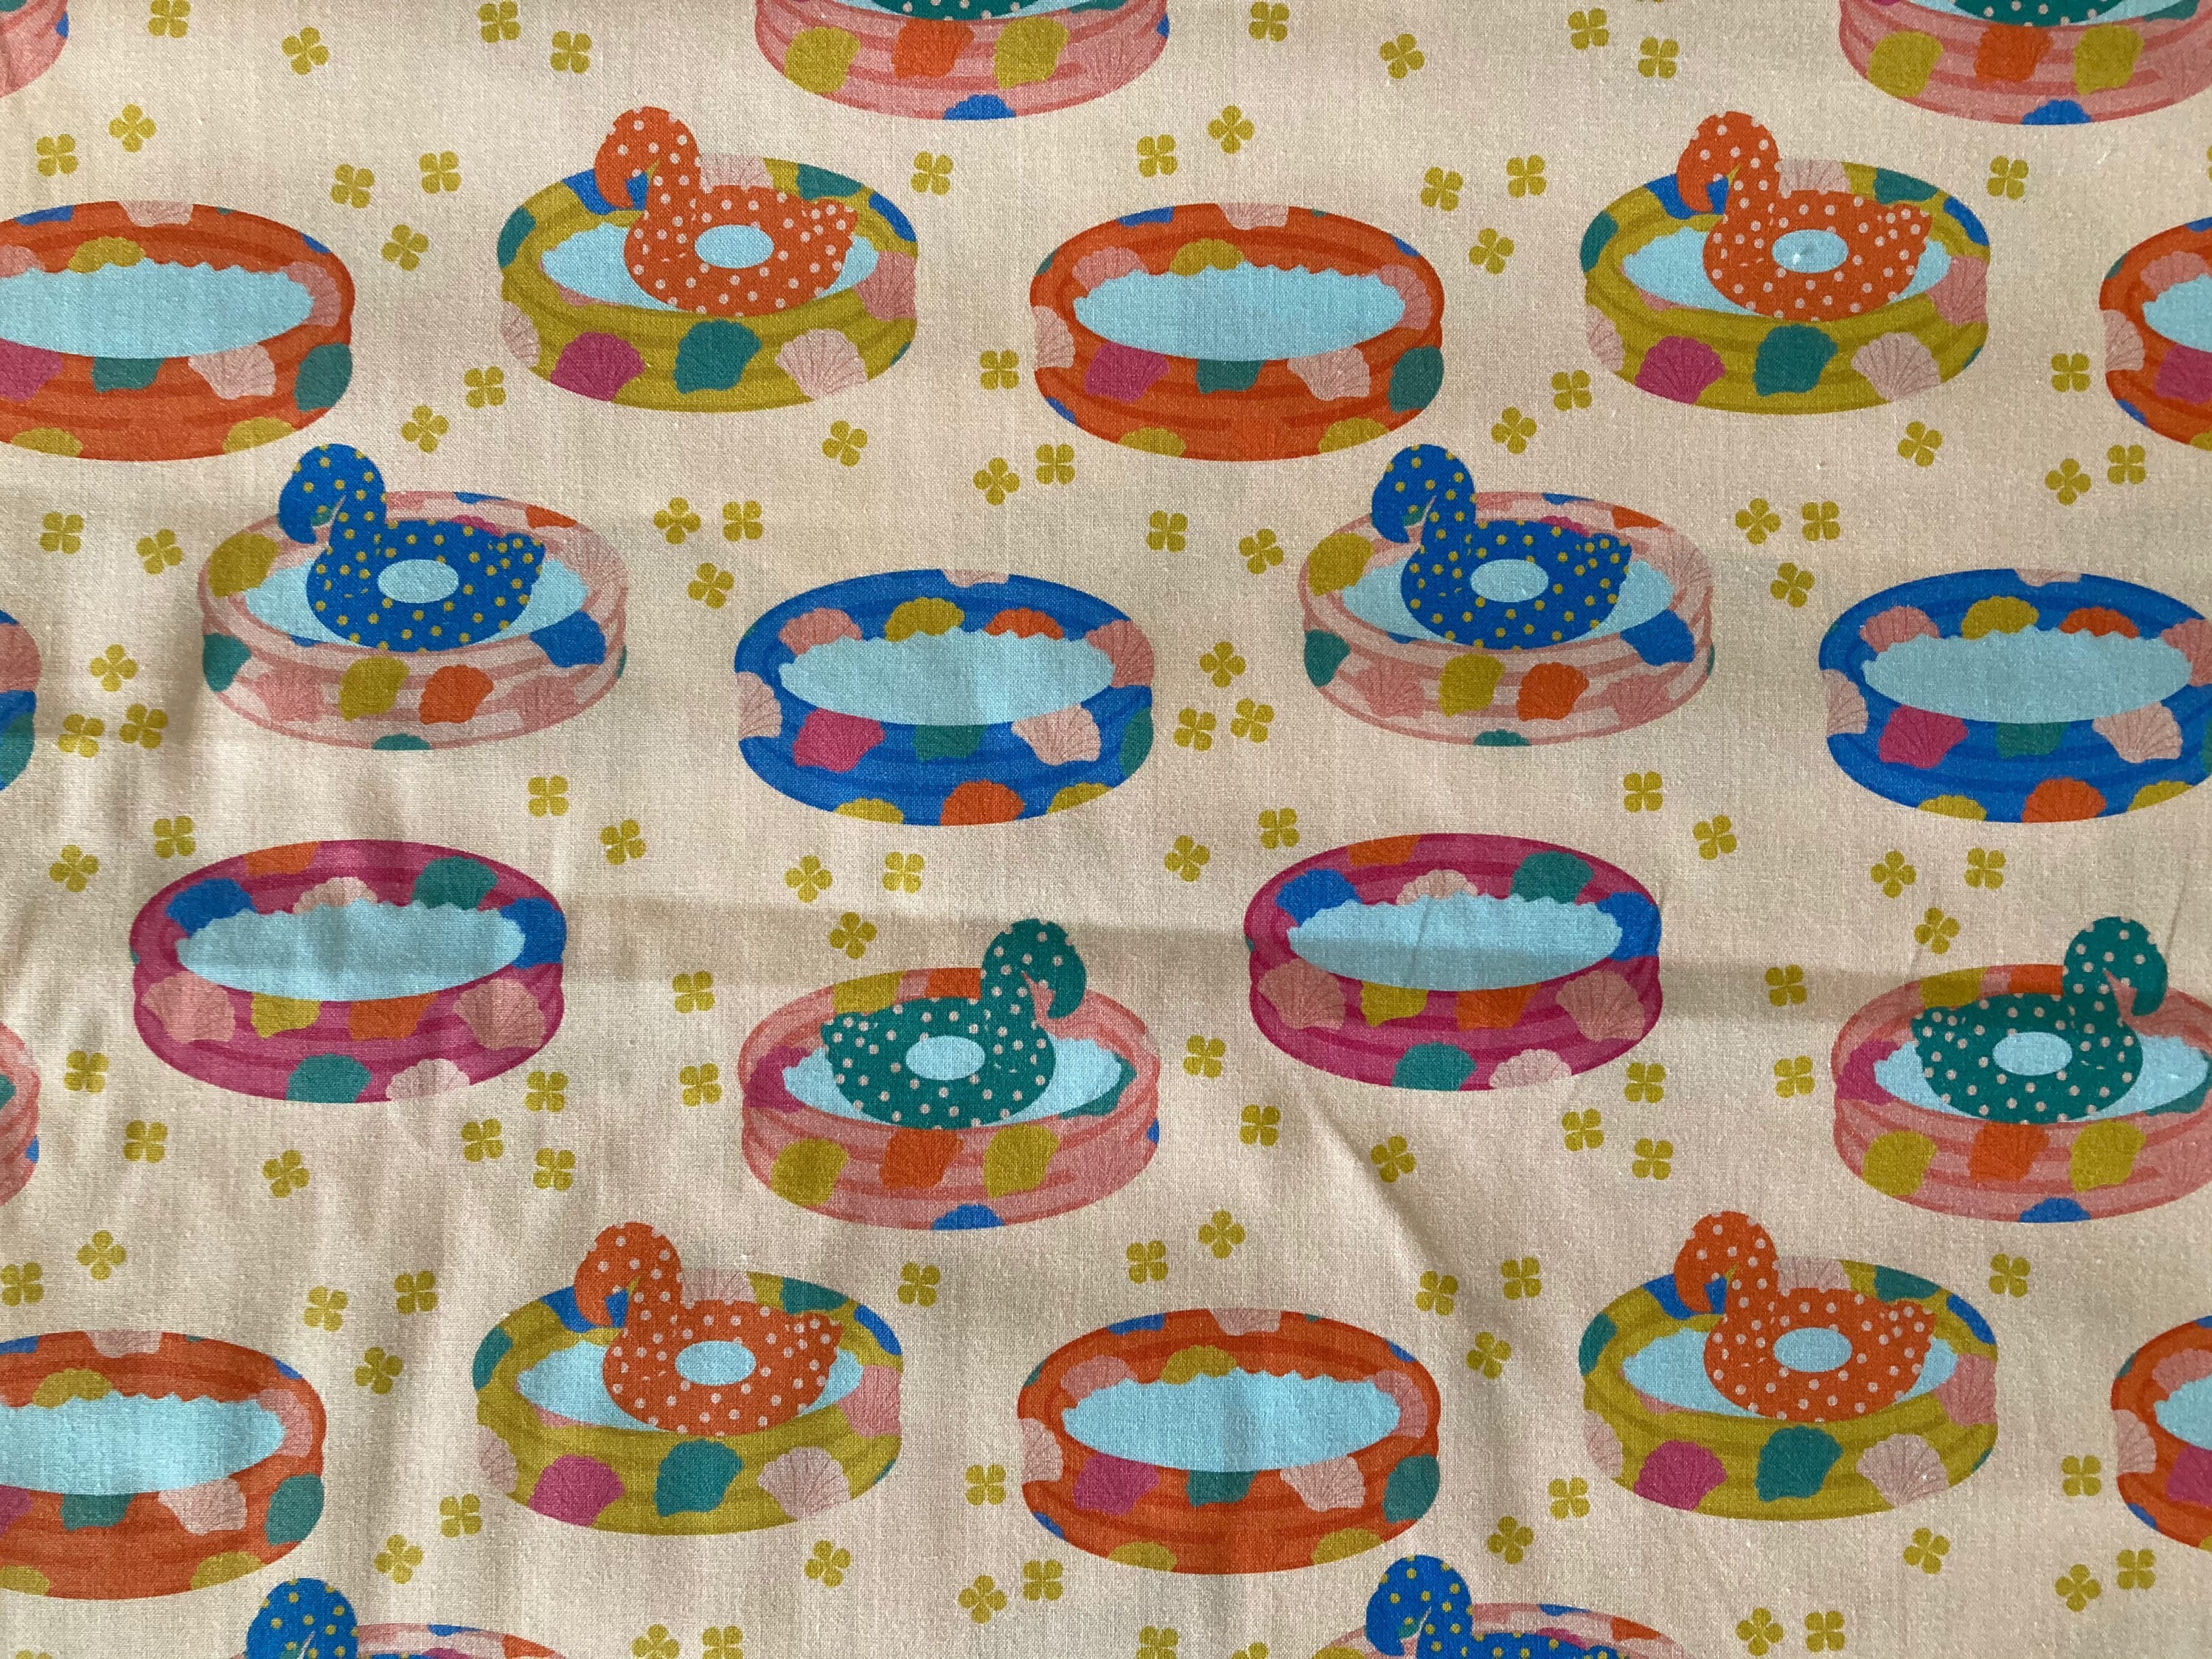 Sunshine Fabrics 100% Cotton Kiddie Pool ~ Vacay Mode Collection by Petite Hooray Exclusively for Milkshakes